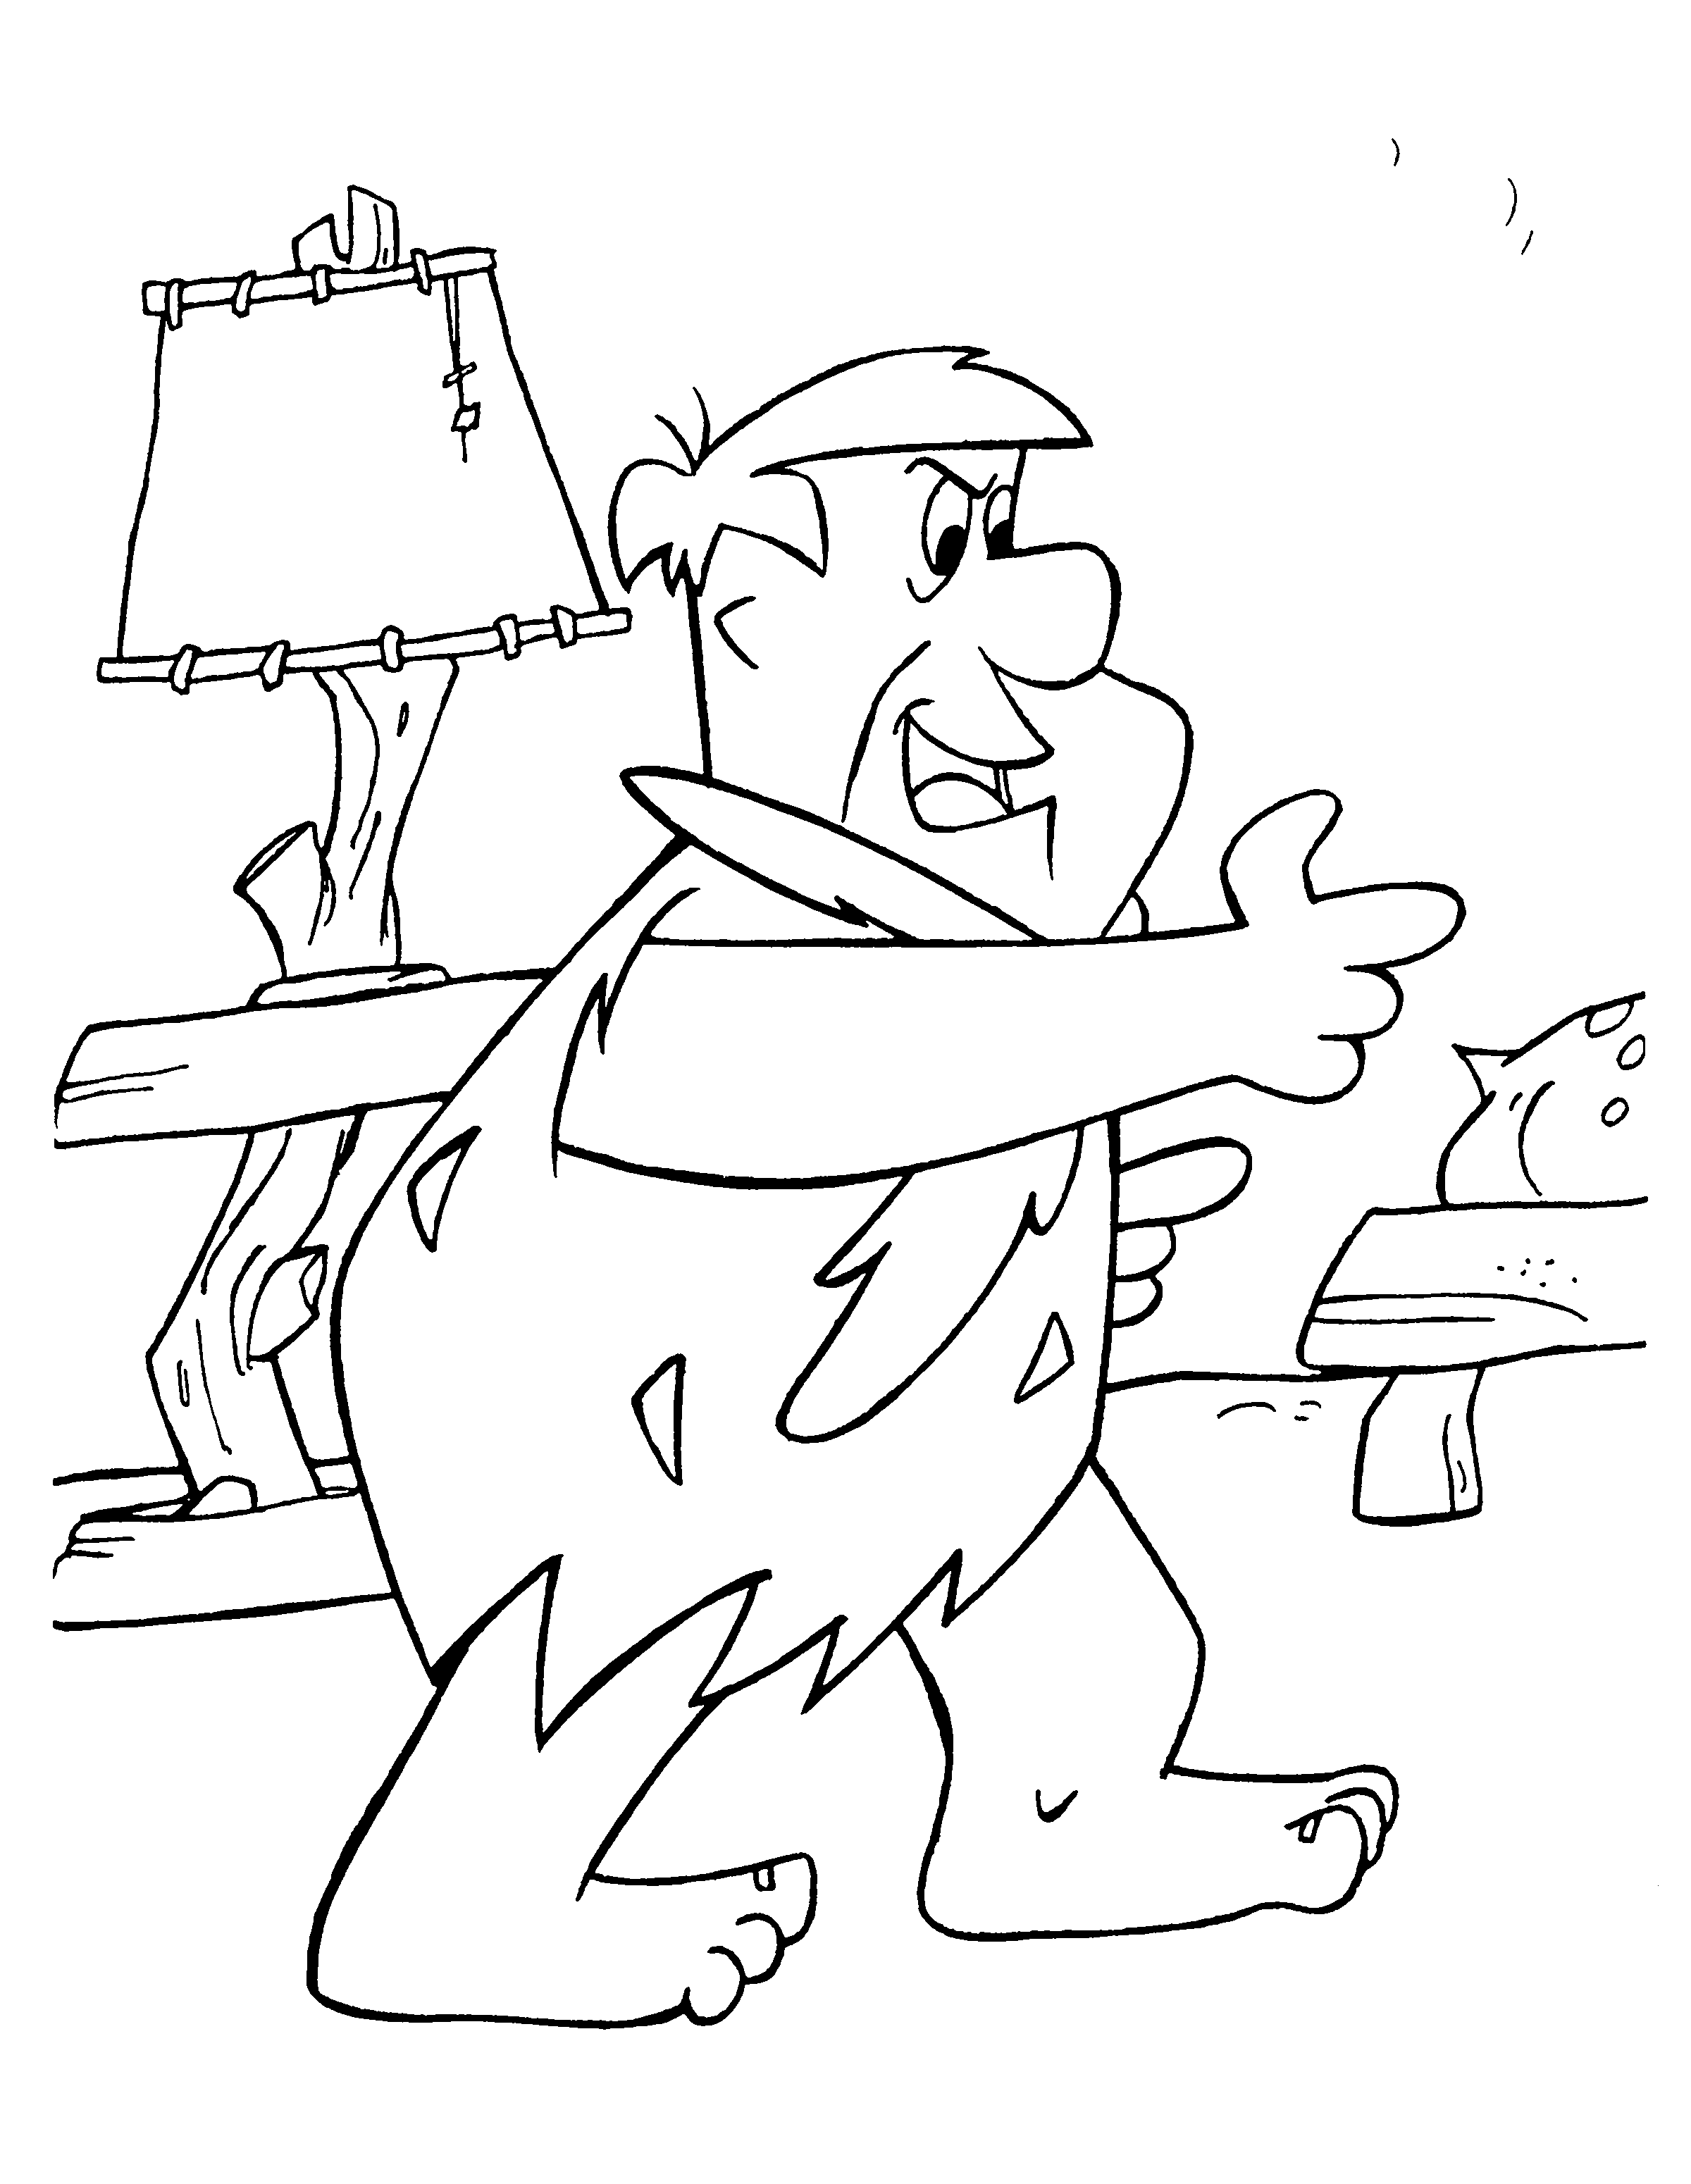 animated-coloring-pages-flintstones-image-0036